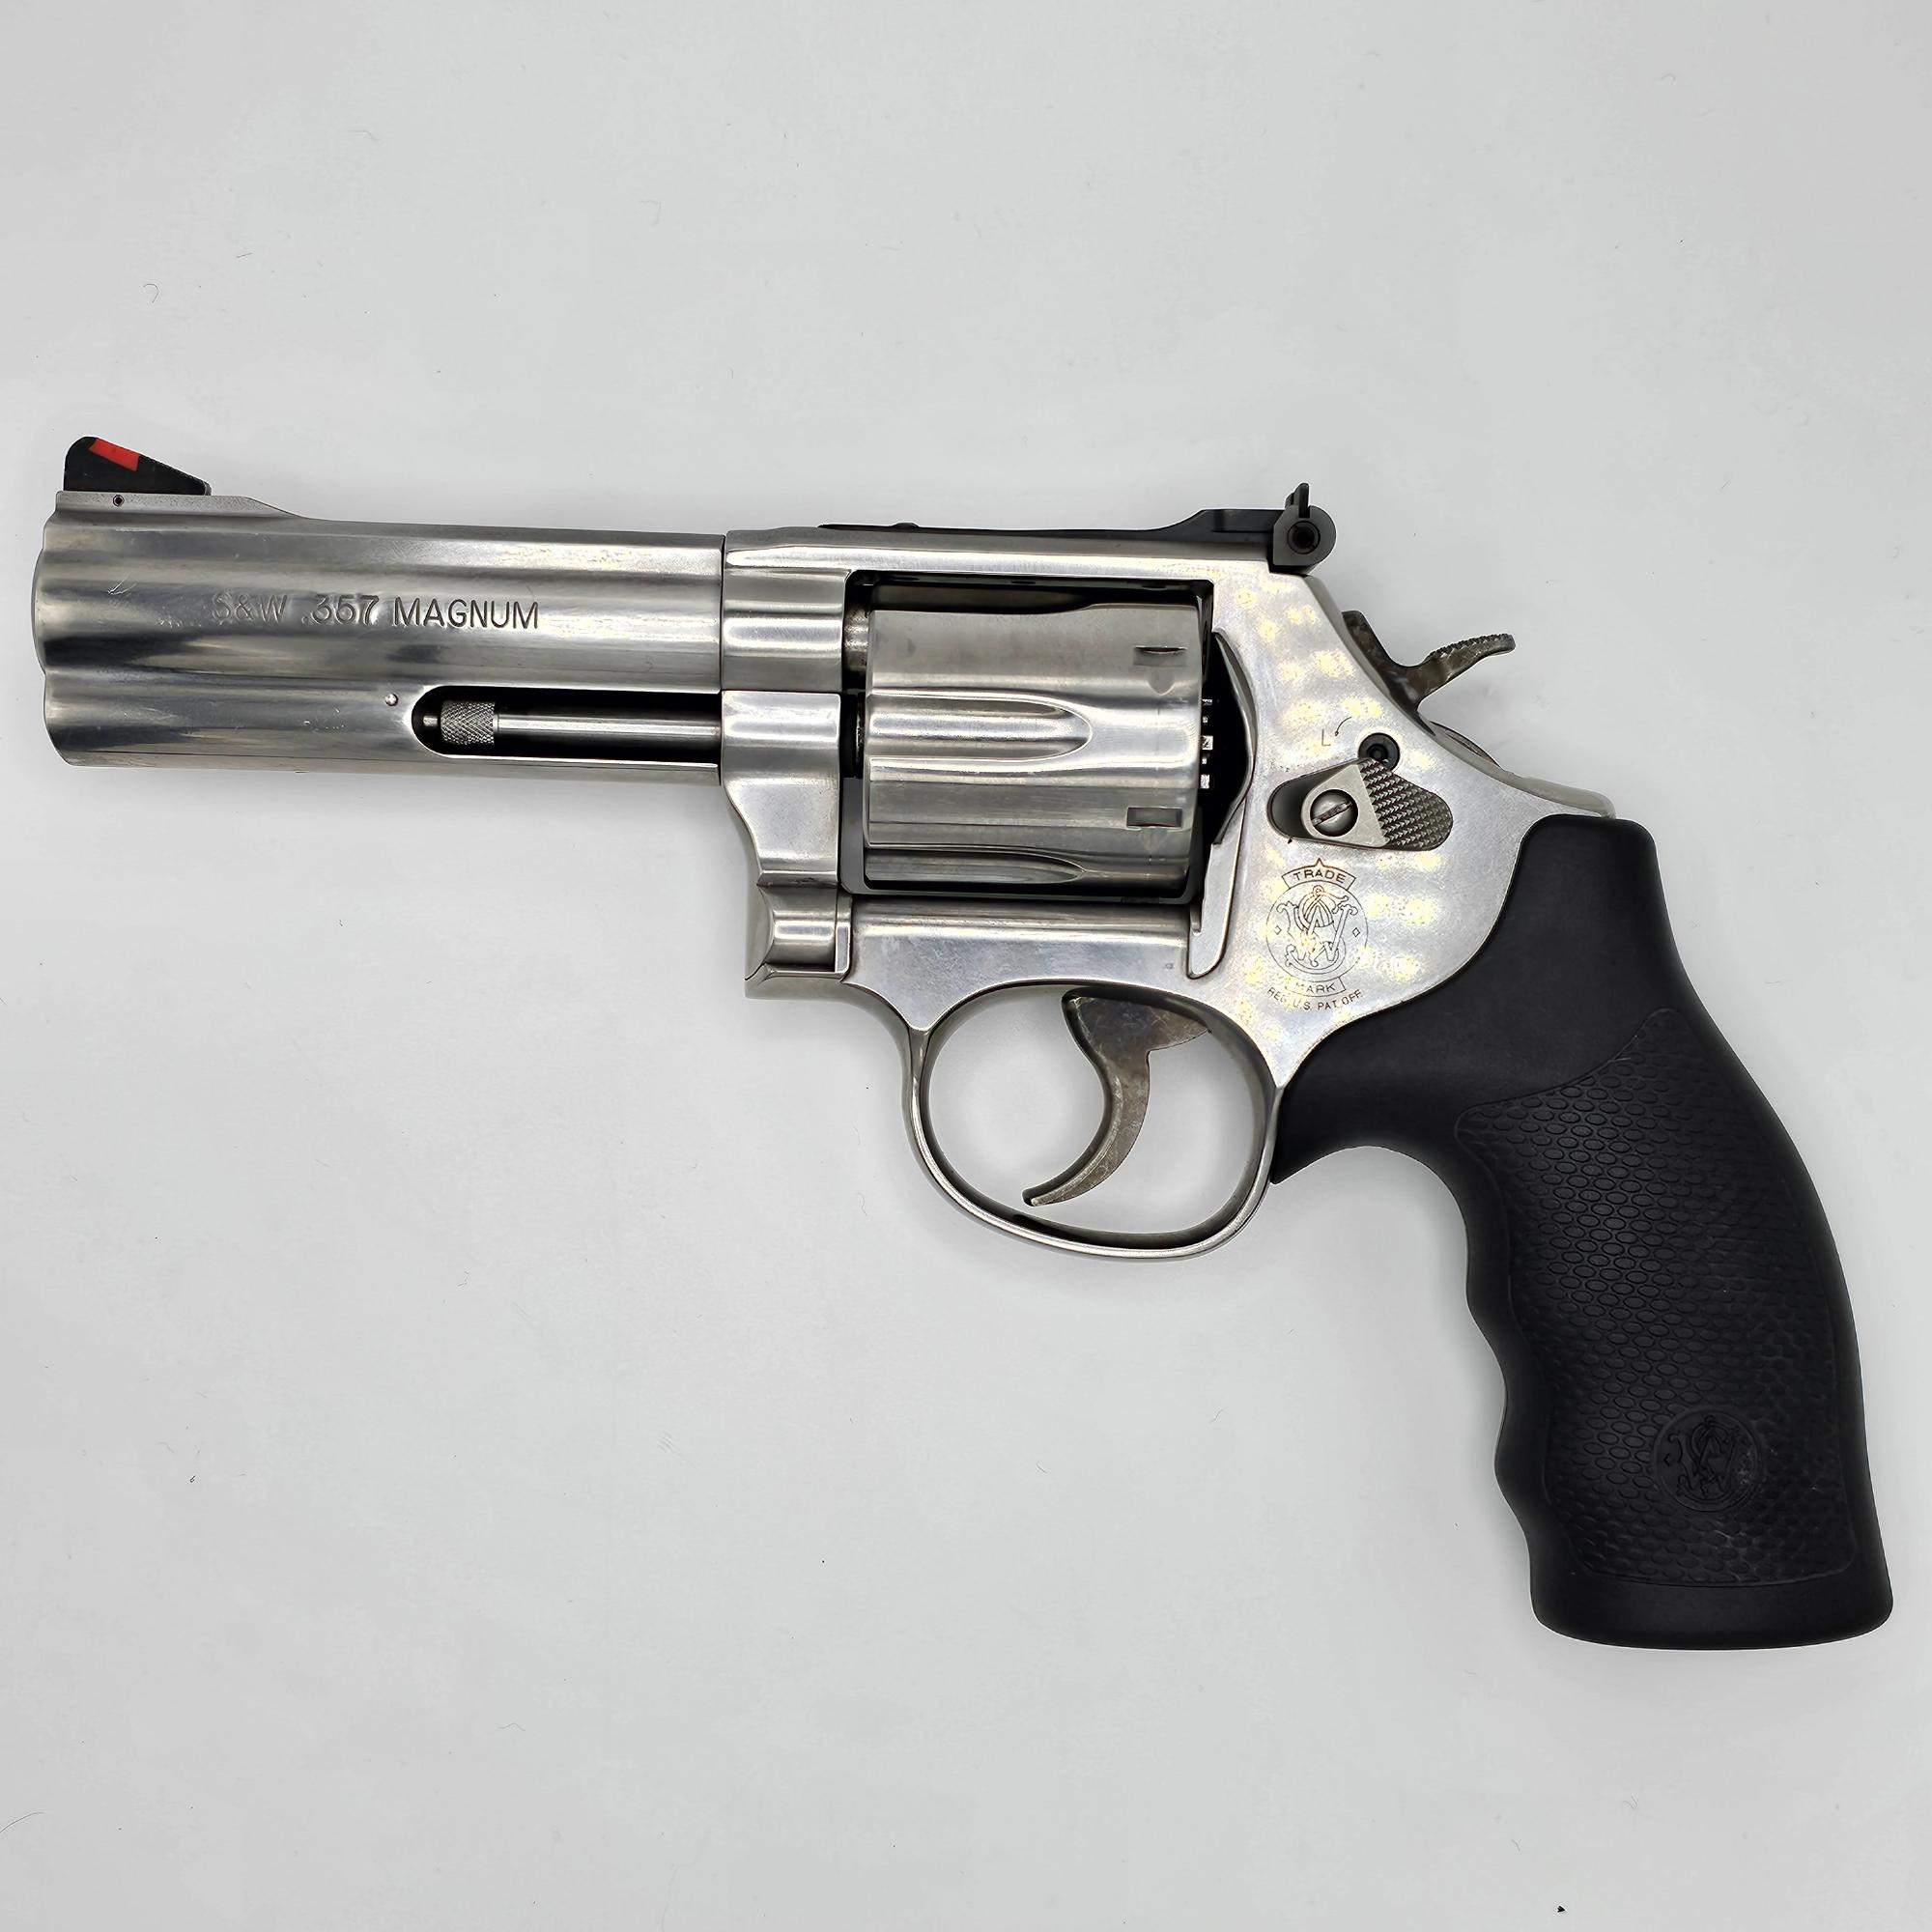 SMITH AND WESSON 686-6 357 REVOLVER USED | 10008503